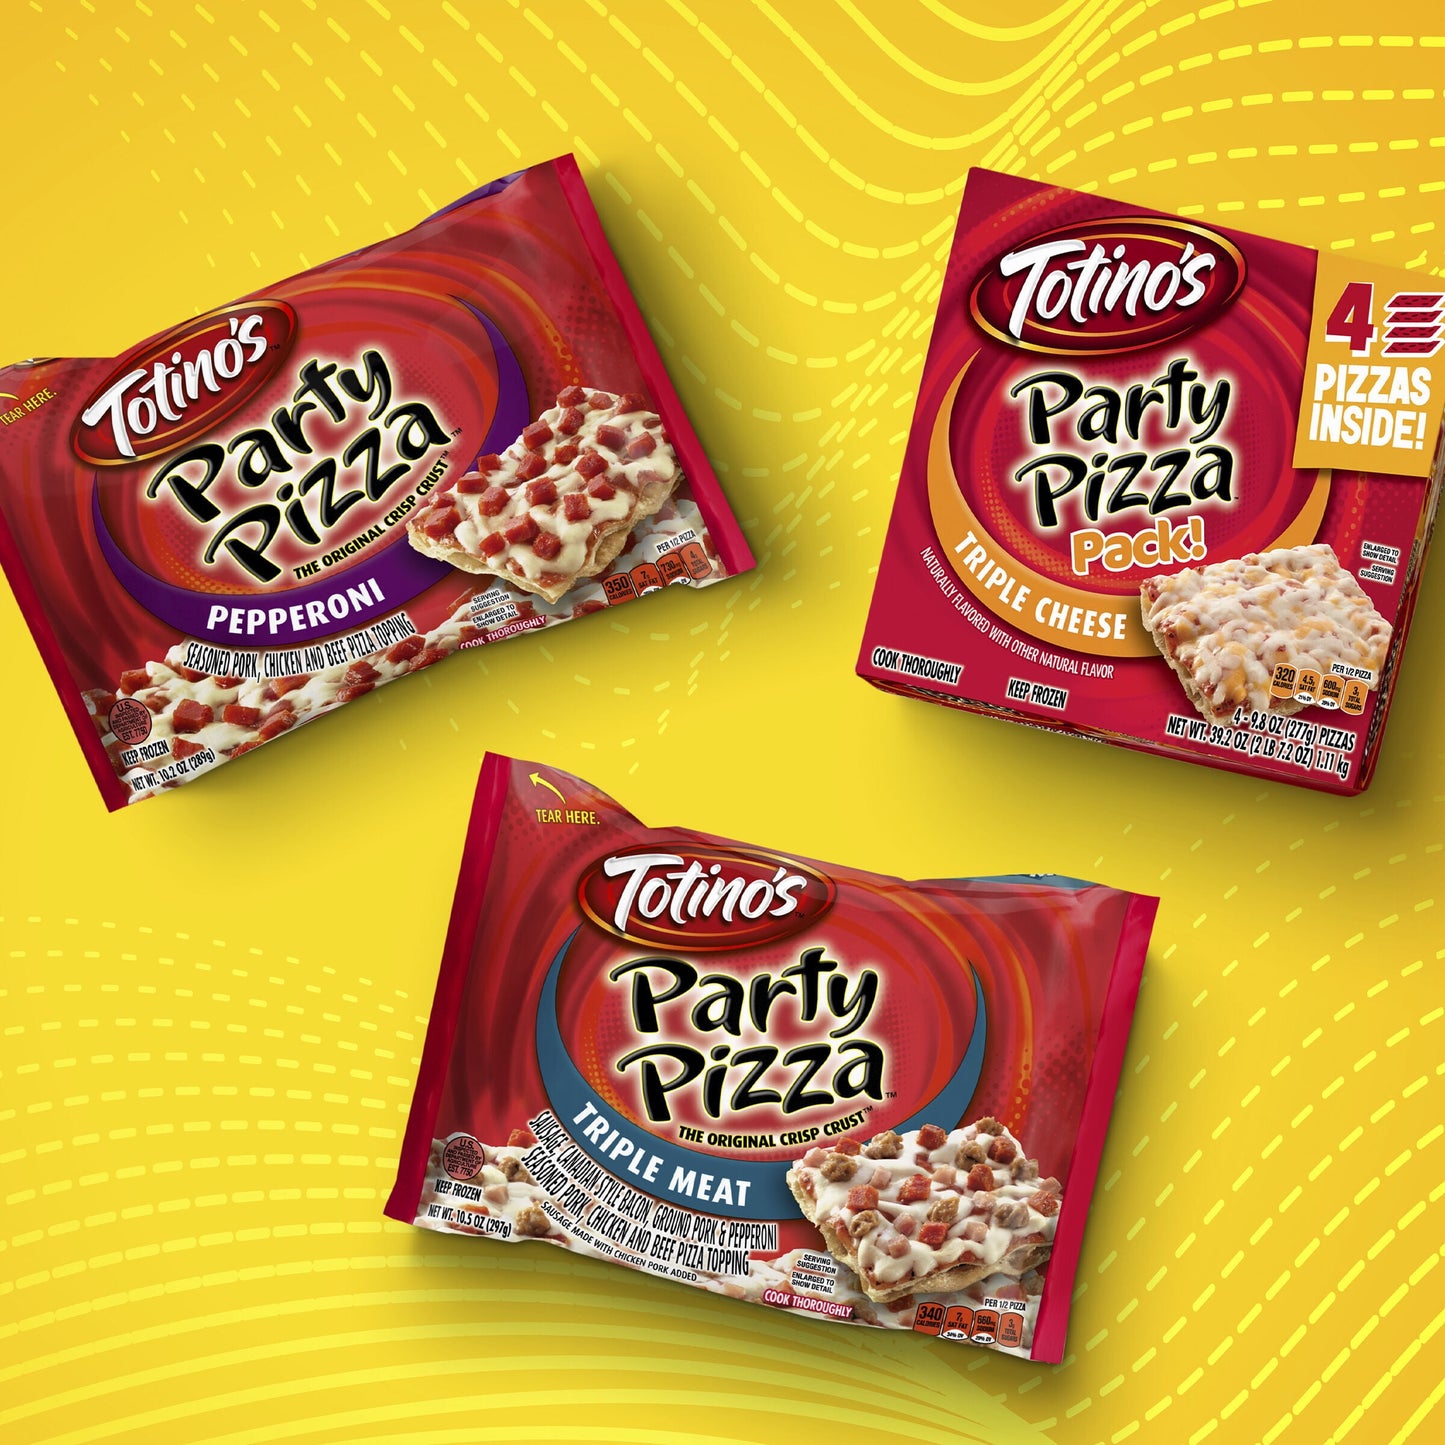 Totino's Party Pizza, Pepperoni Flavored, Frozen Snacks, 1 ct